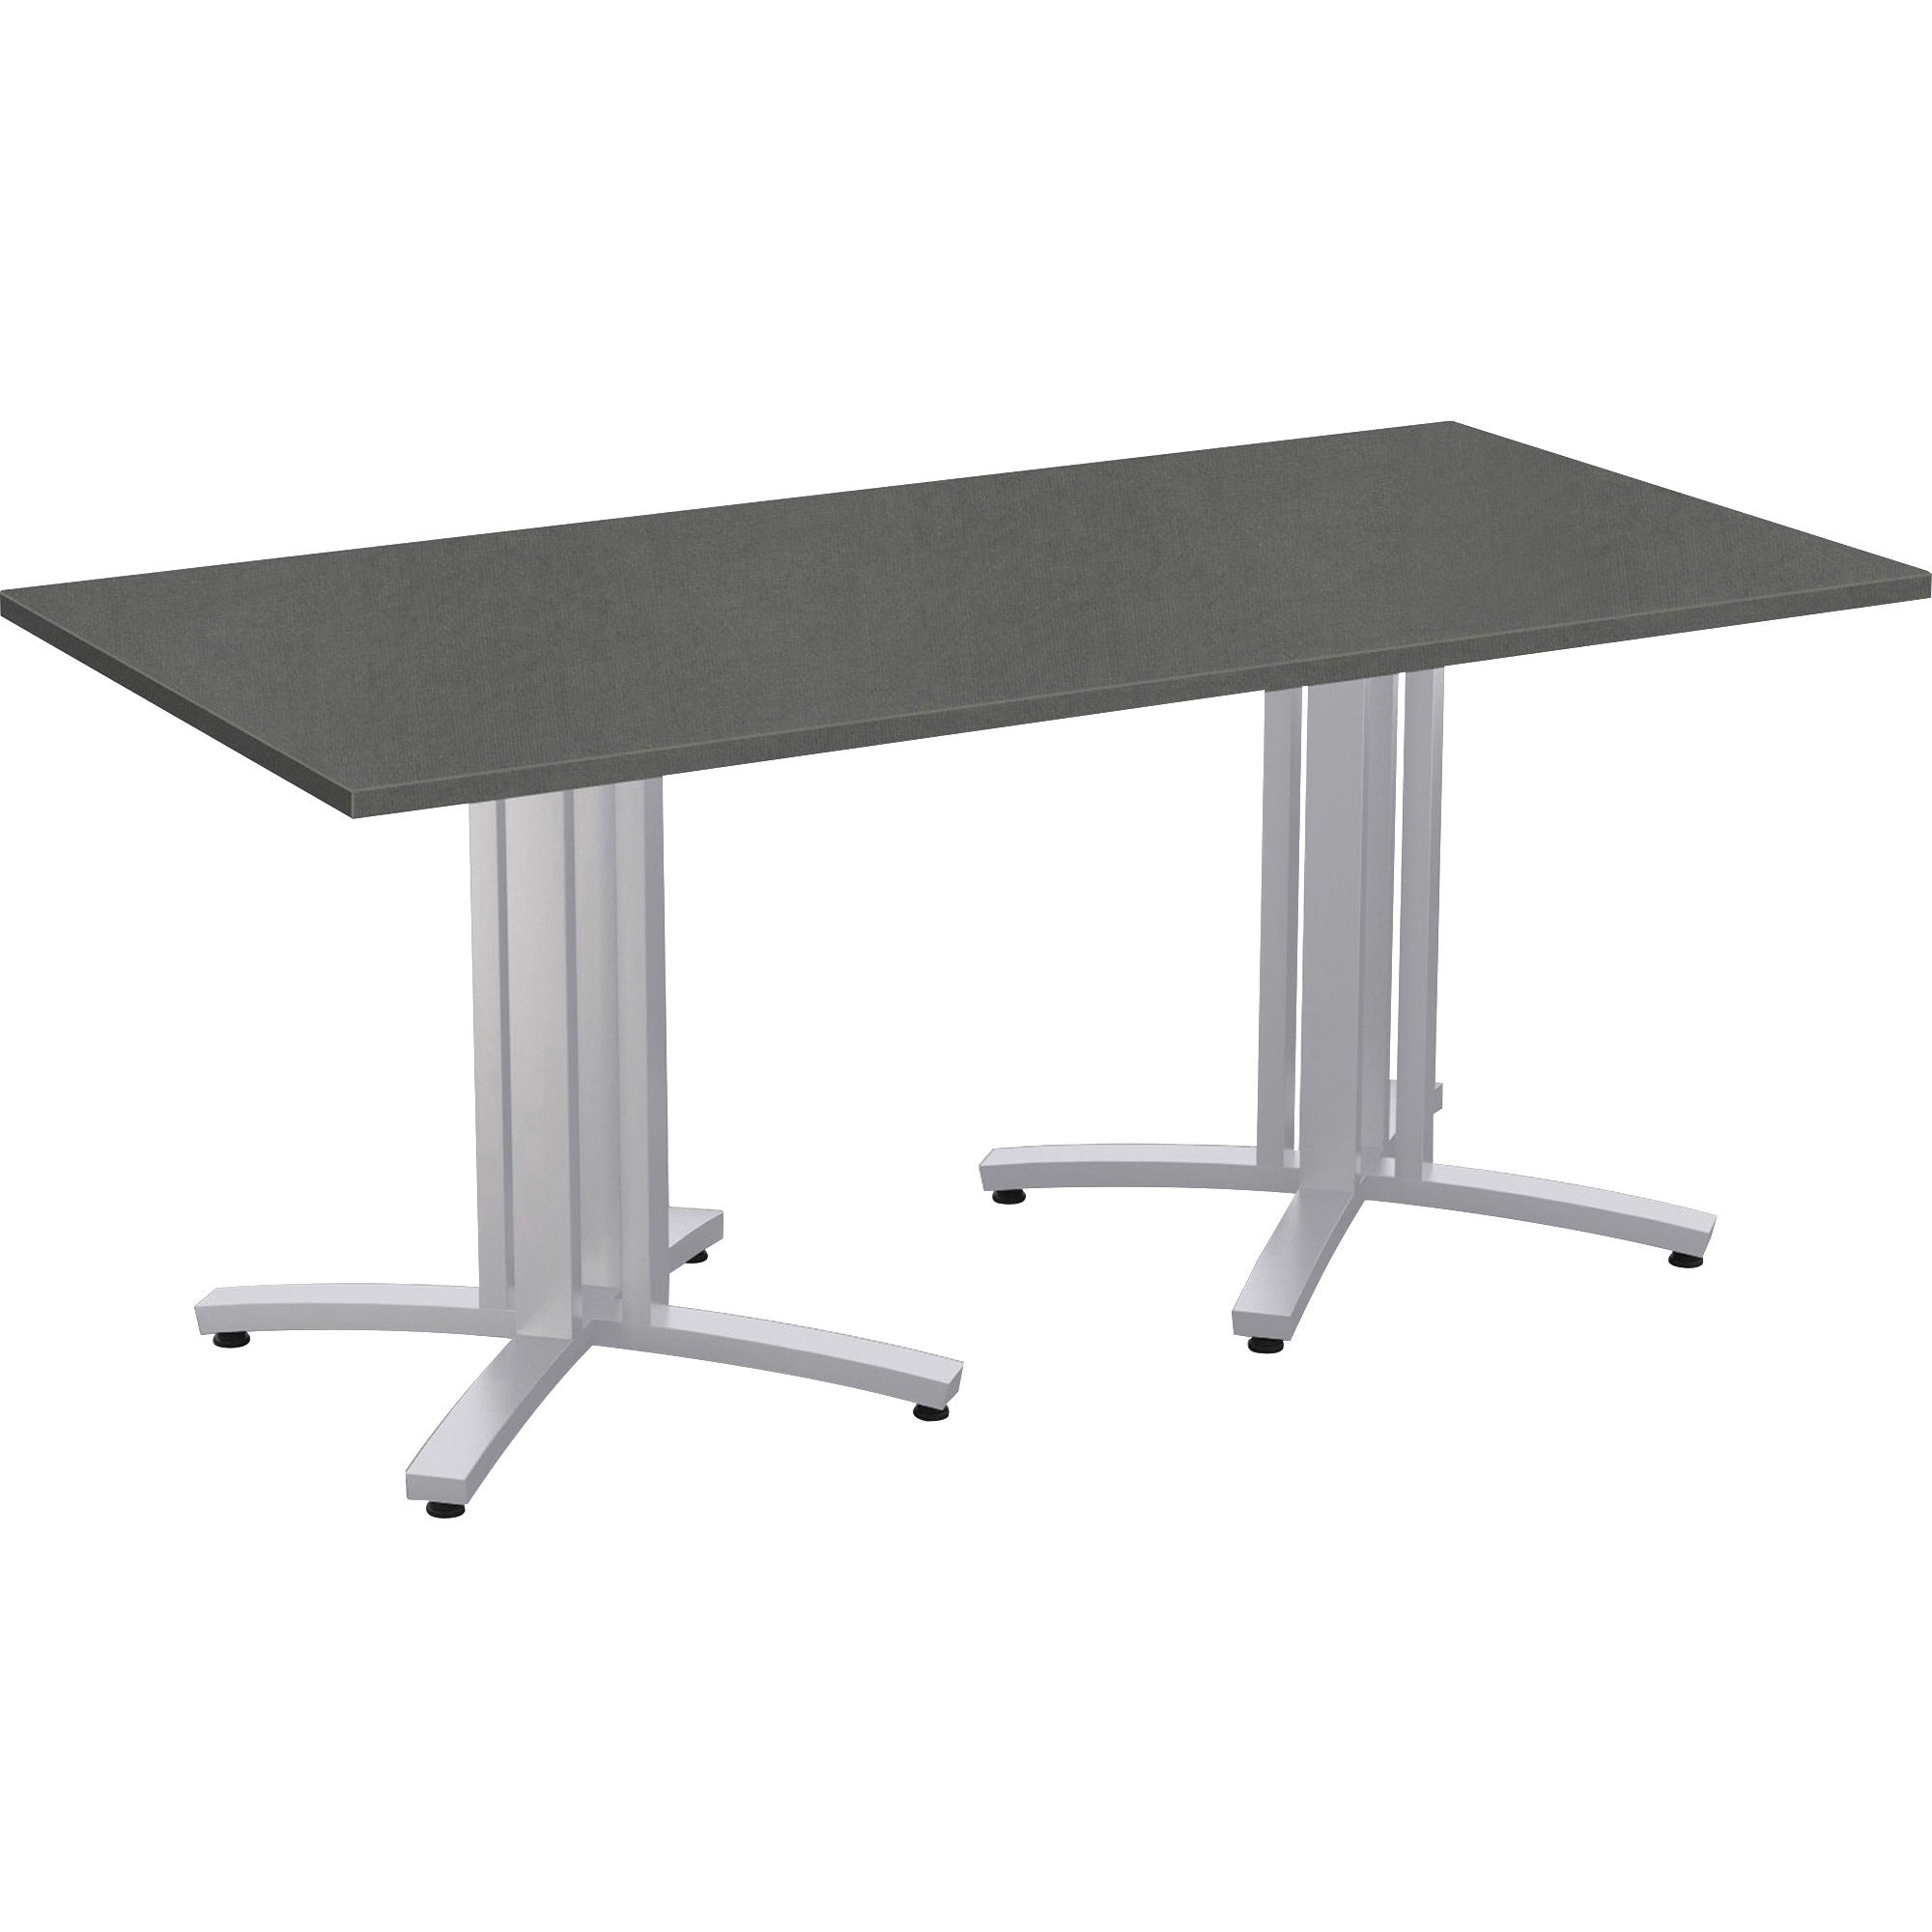 special-t-structure-4x-conference-table-for-table-topsteel-mesh-rectangle-top-72-table-top-length-x-36-table-top-width-29-height-assembly-required-high-pressure-laminate-hpl-top-material-1-each_scts4xrt3672sm - 1